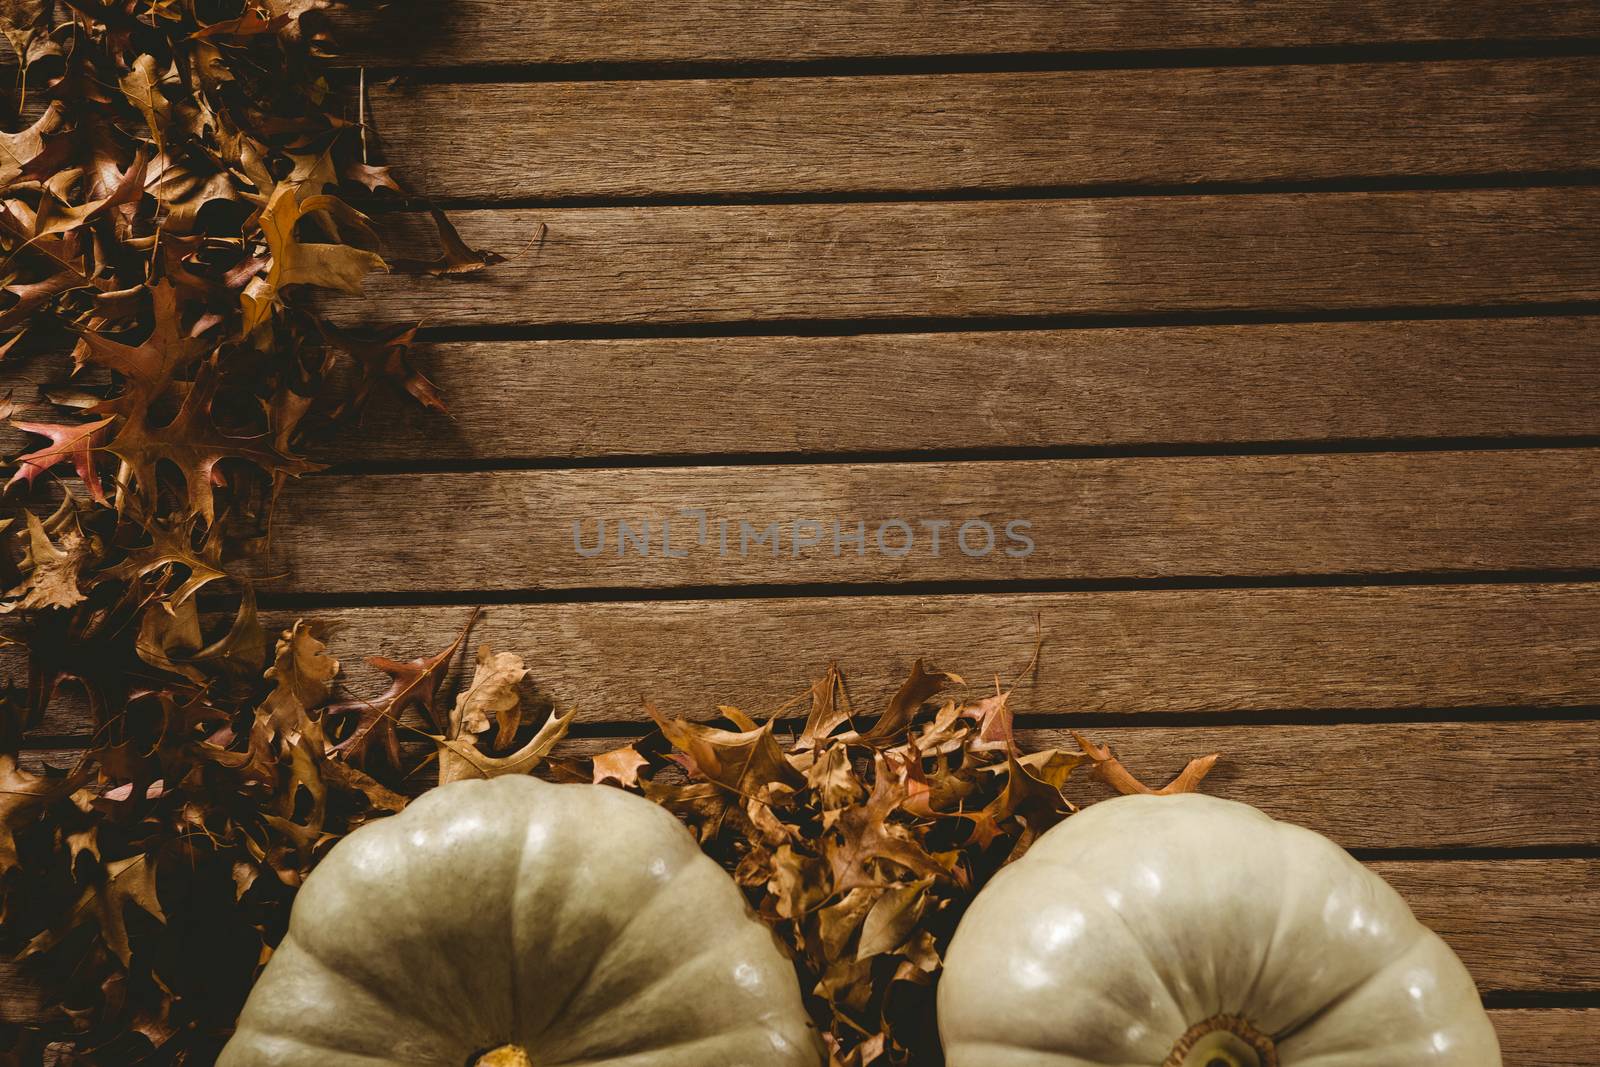 Autumn leaves by pumpkins on table during Halloween by Wavebreakmedia